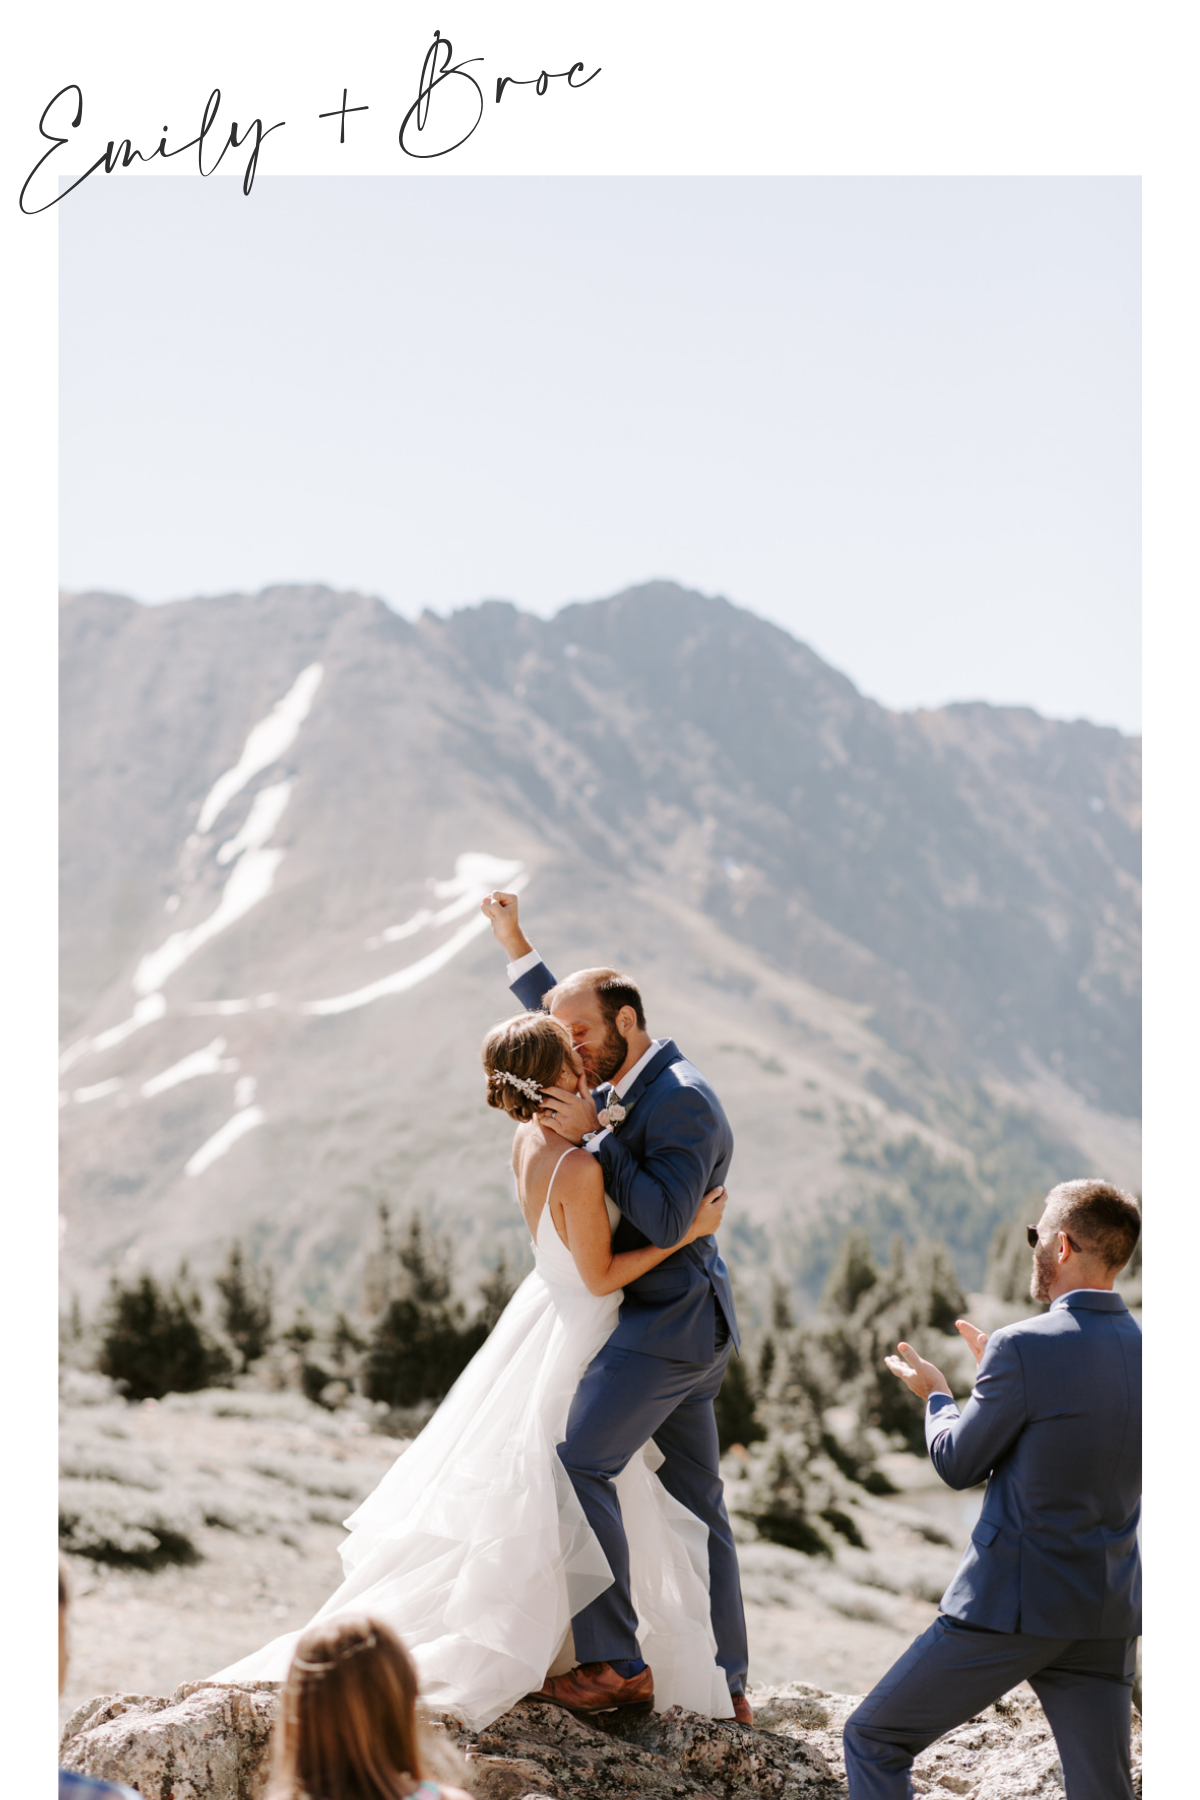 Bride and groom elope at Loveland Pass with their closest family and friends and groom hit the jackpot during their first kiss with his bride. Images by Colorado elopement photographer Diana Coulter.